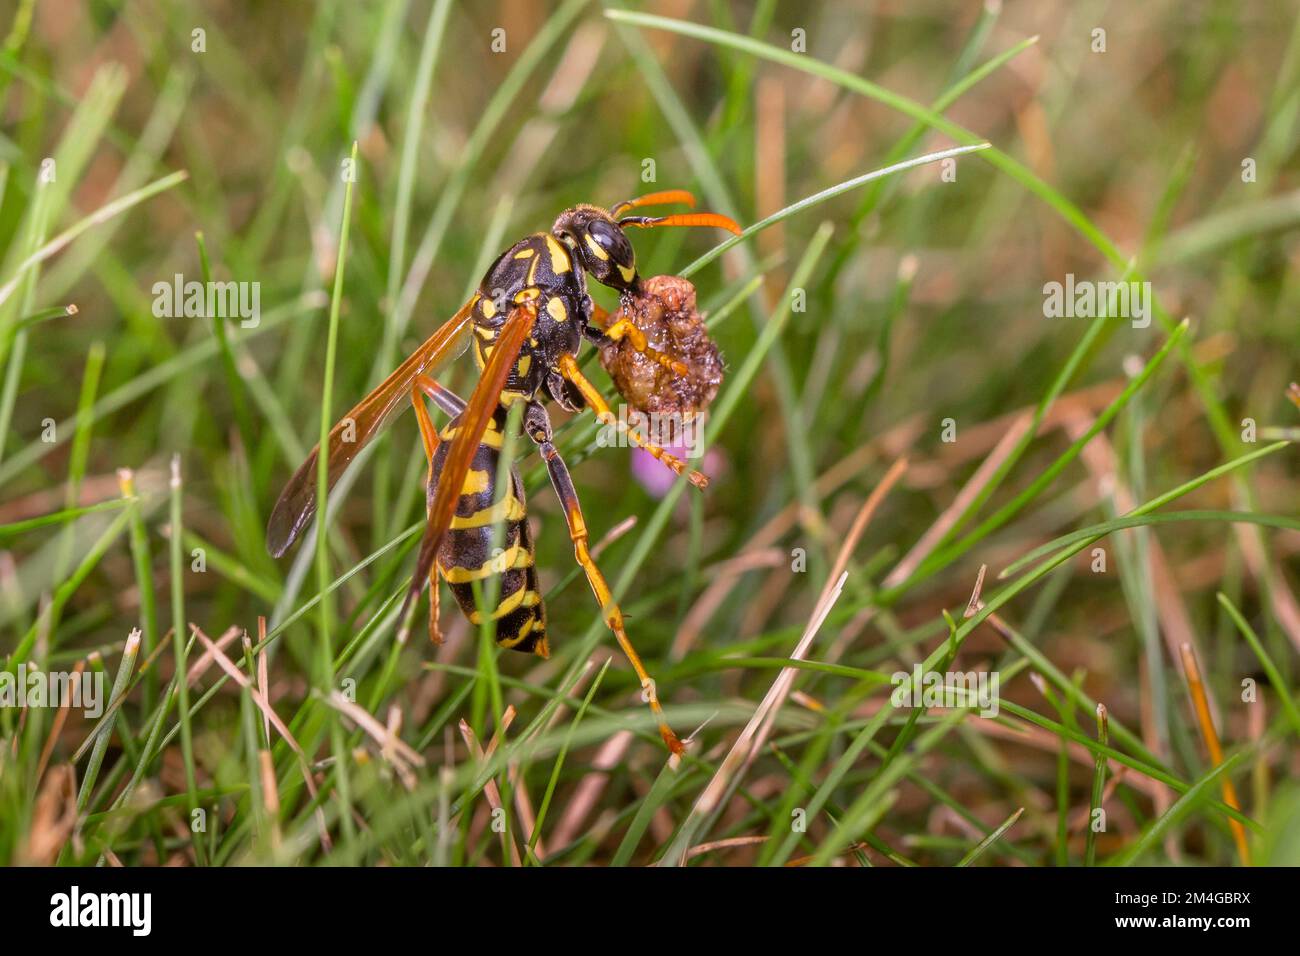 Paper wasp (Polistes gallica, Polistes dominula), European paper wasp has chewed prey in its mouth, flying out of a meadow, Germany, Bavaria Stock Photo